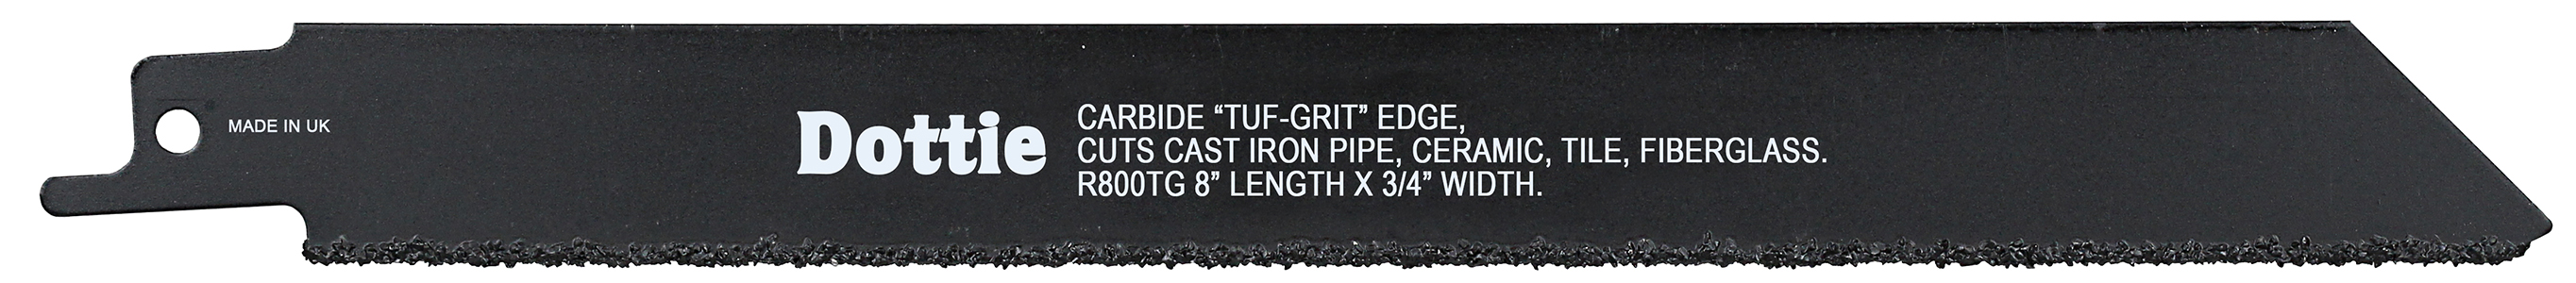 Reciproblade, 8 in. length, 3/4 in. width, 0.040 in. thickness, Carbide material